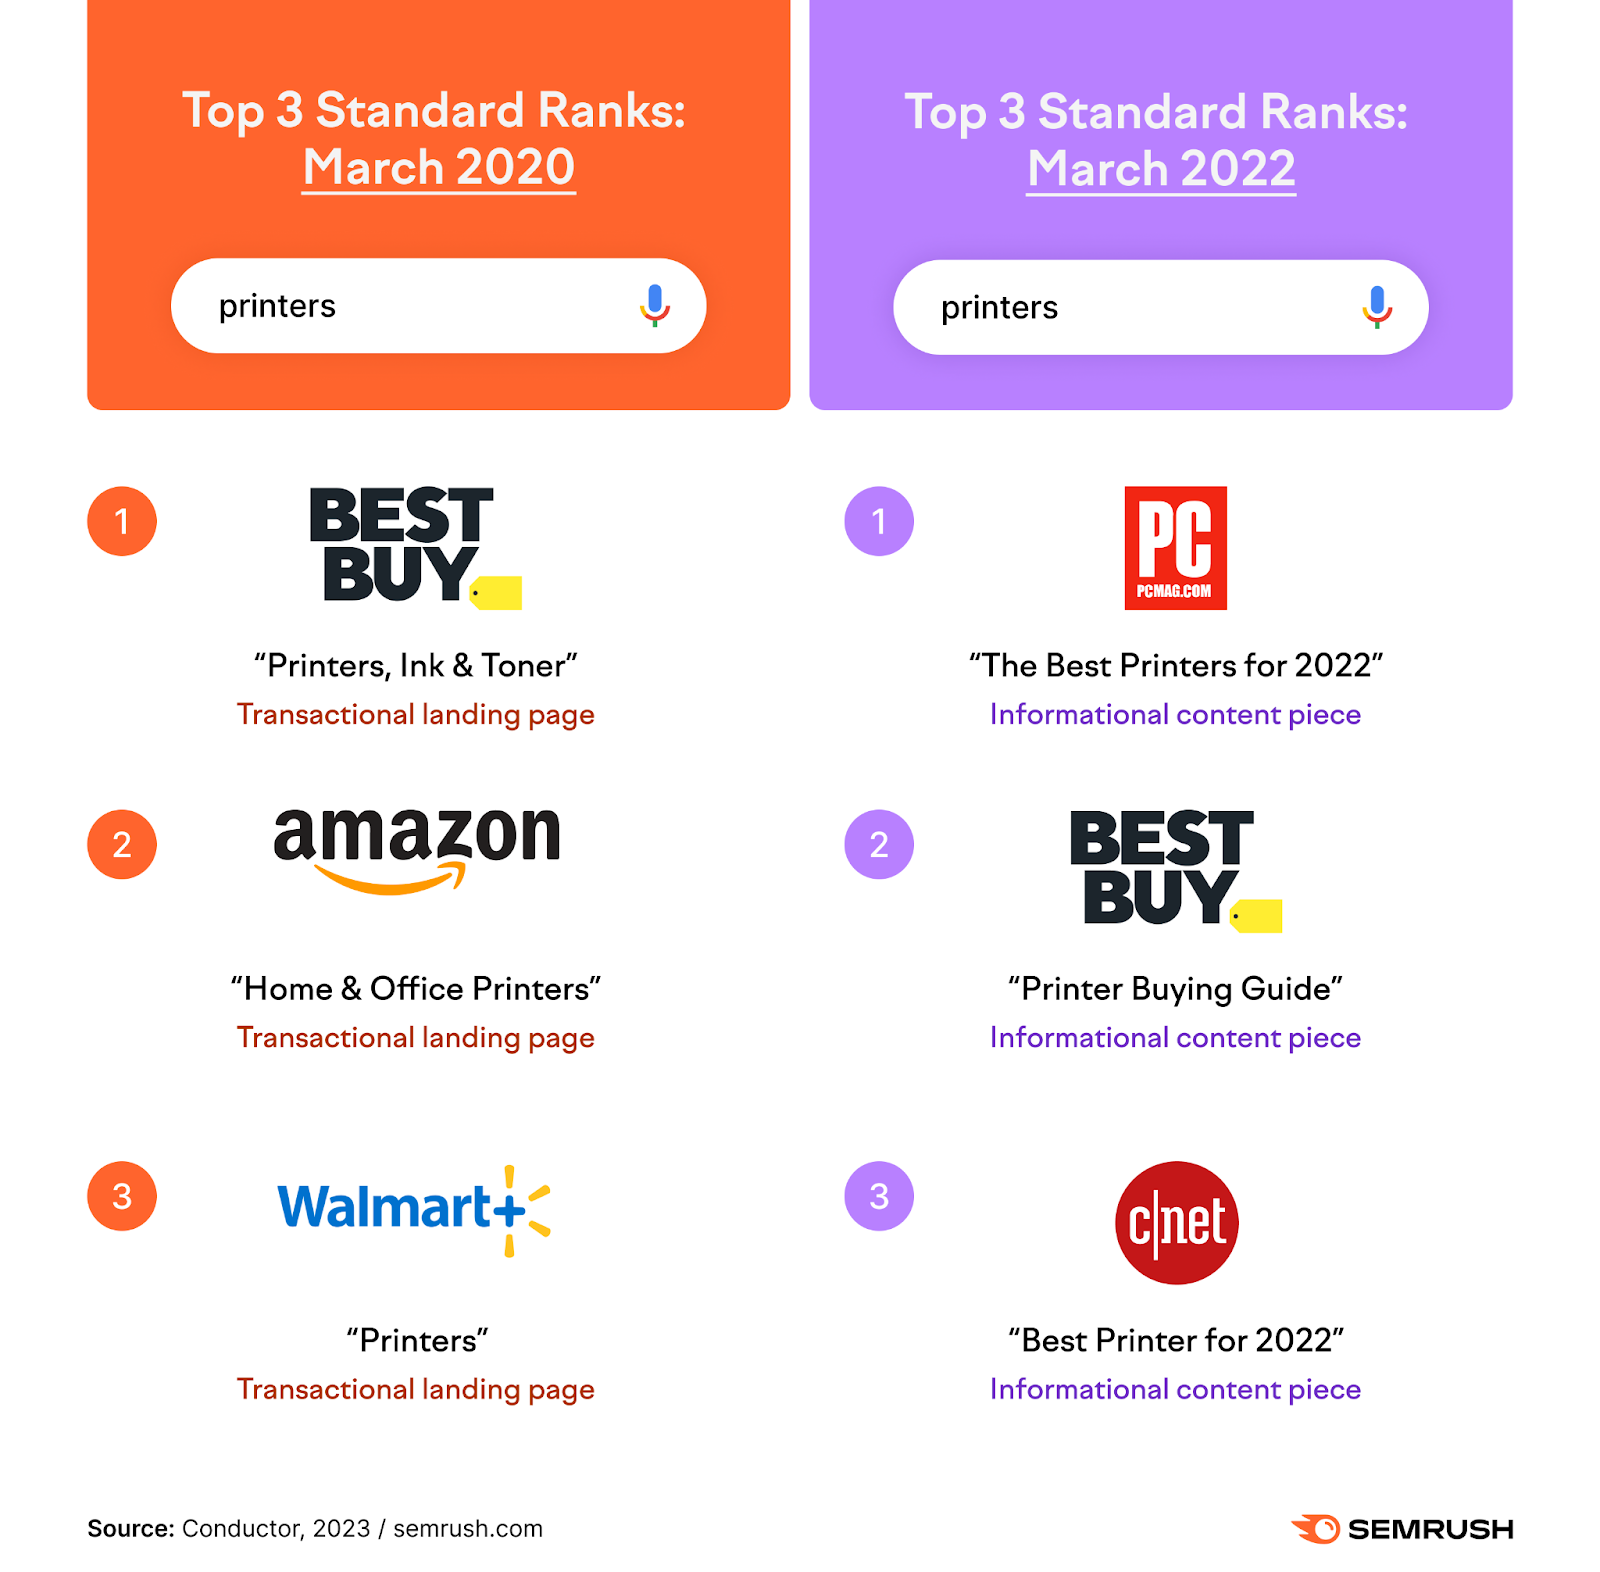 top 3 standard ranks in March 2020 for the search "printer" included Best Buy, Amazon and Walmart and in March 2022 they were PC, Best Buy and cnet